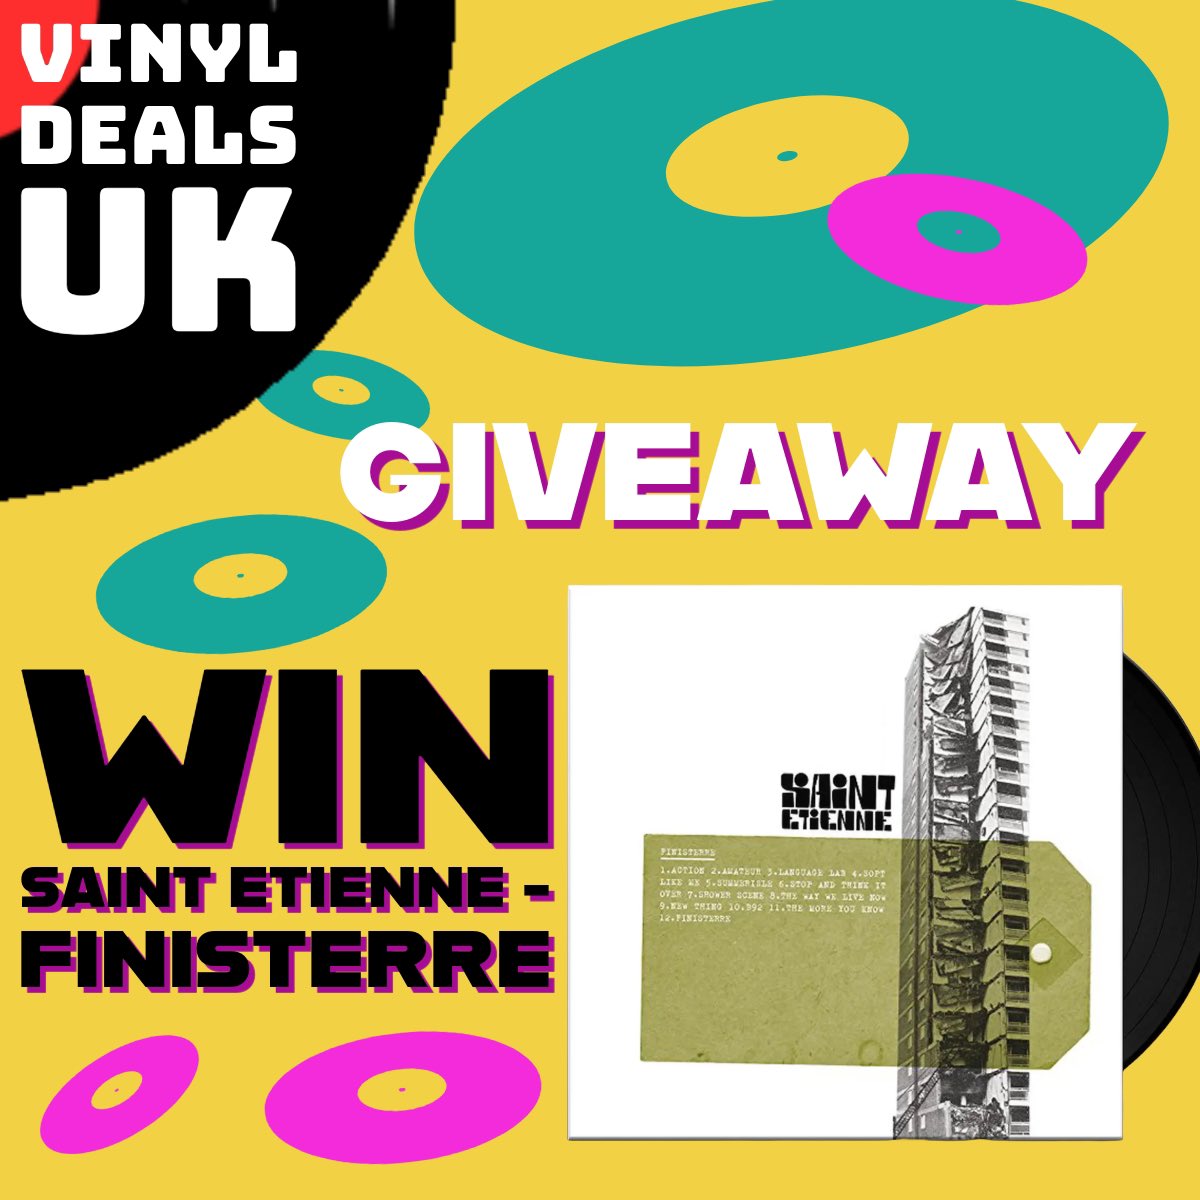 Time to welcome newcomers and thanks to longtimers… with a brand new giveaway. You can win a brand new sealed copy of the vinyl of #SaintEtienne’s Finisterre (2017 pressing). To be in with chance, follow the below rules. The winner will be picked at noon on Monday 27th May.…